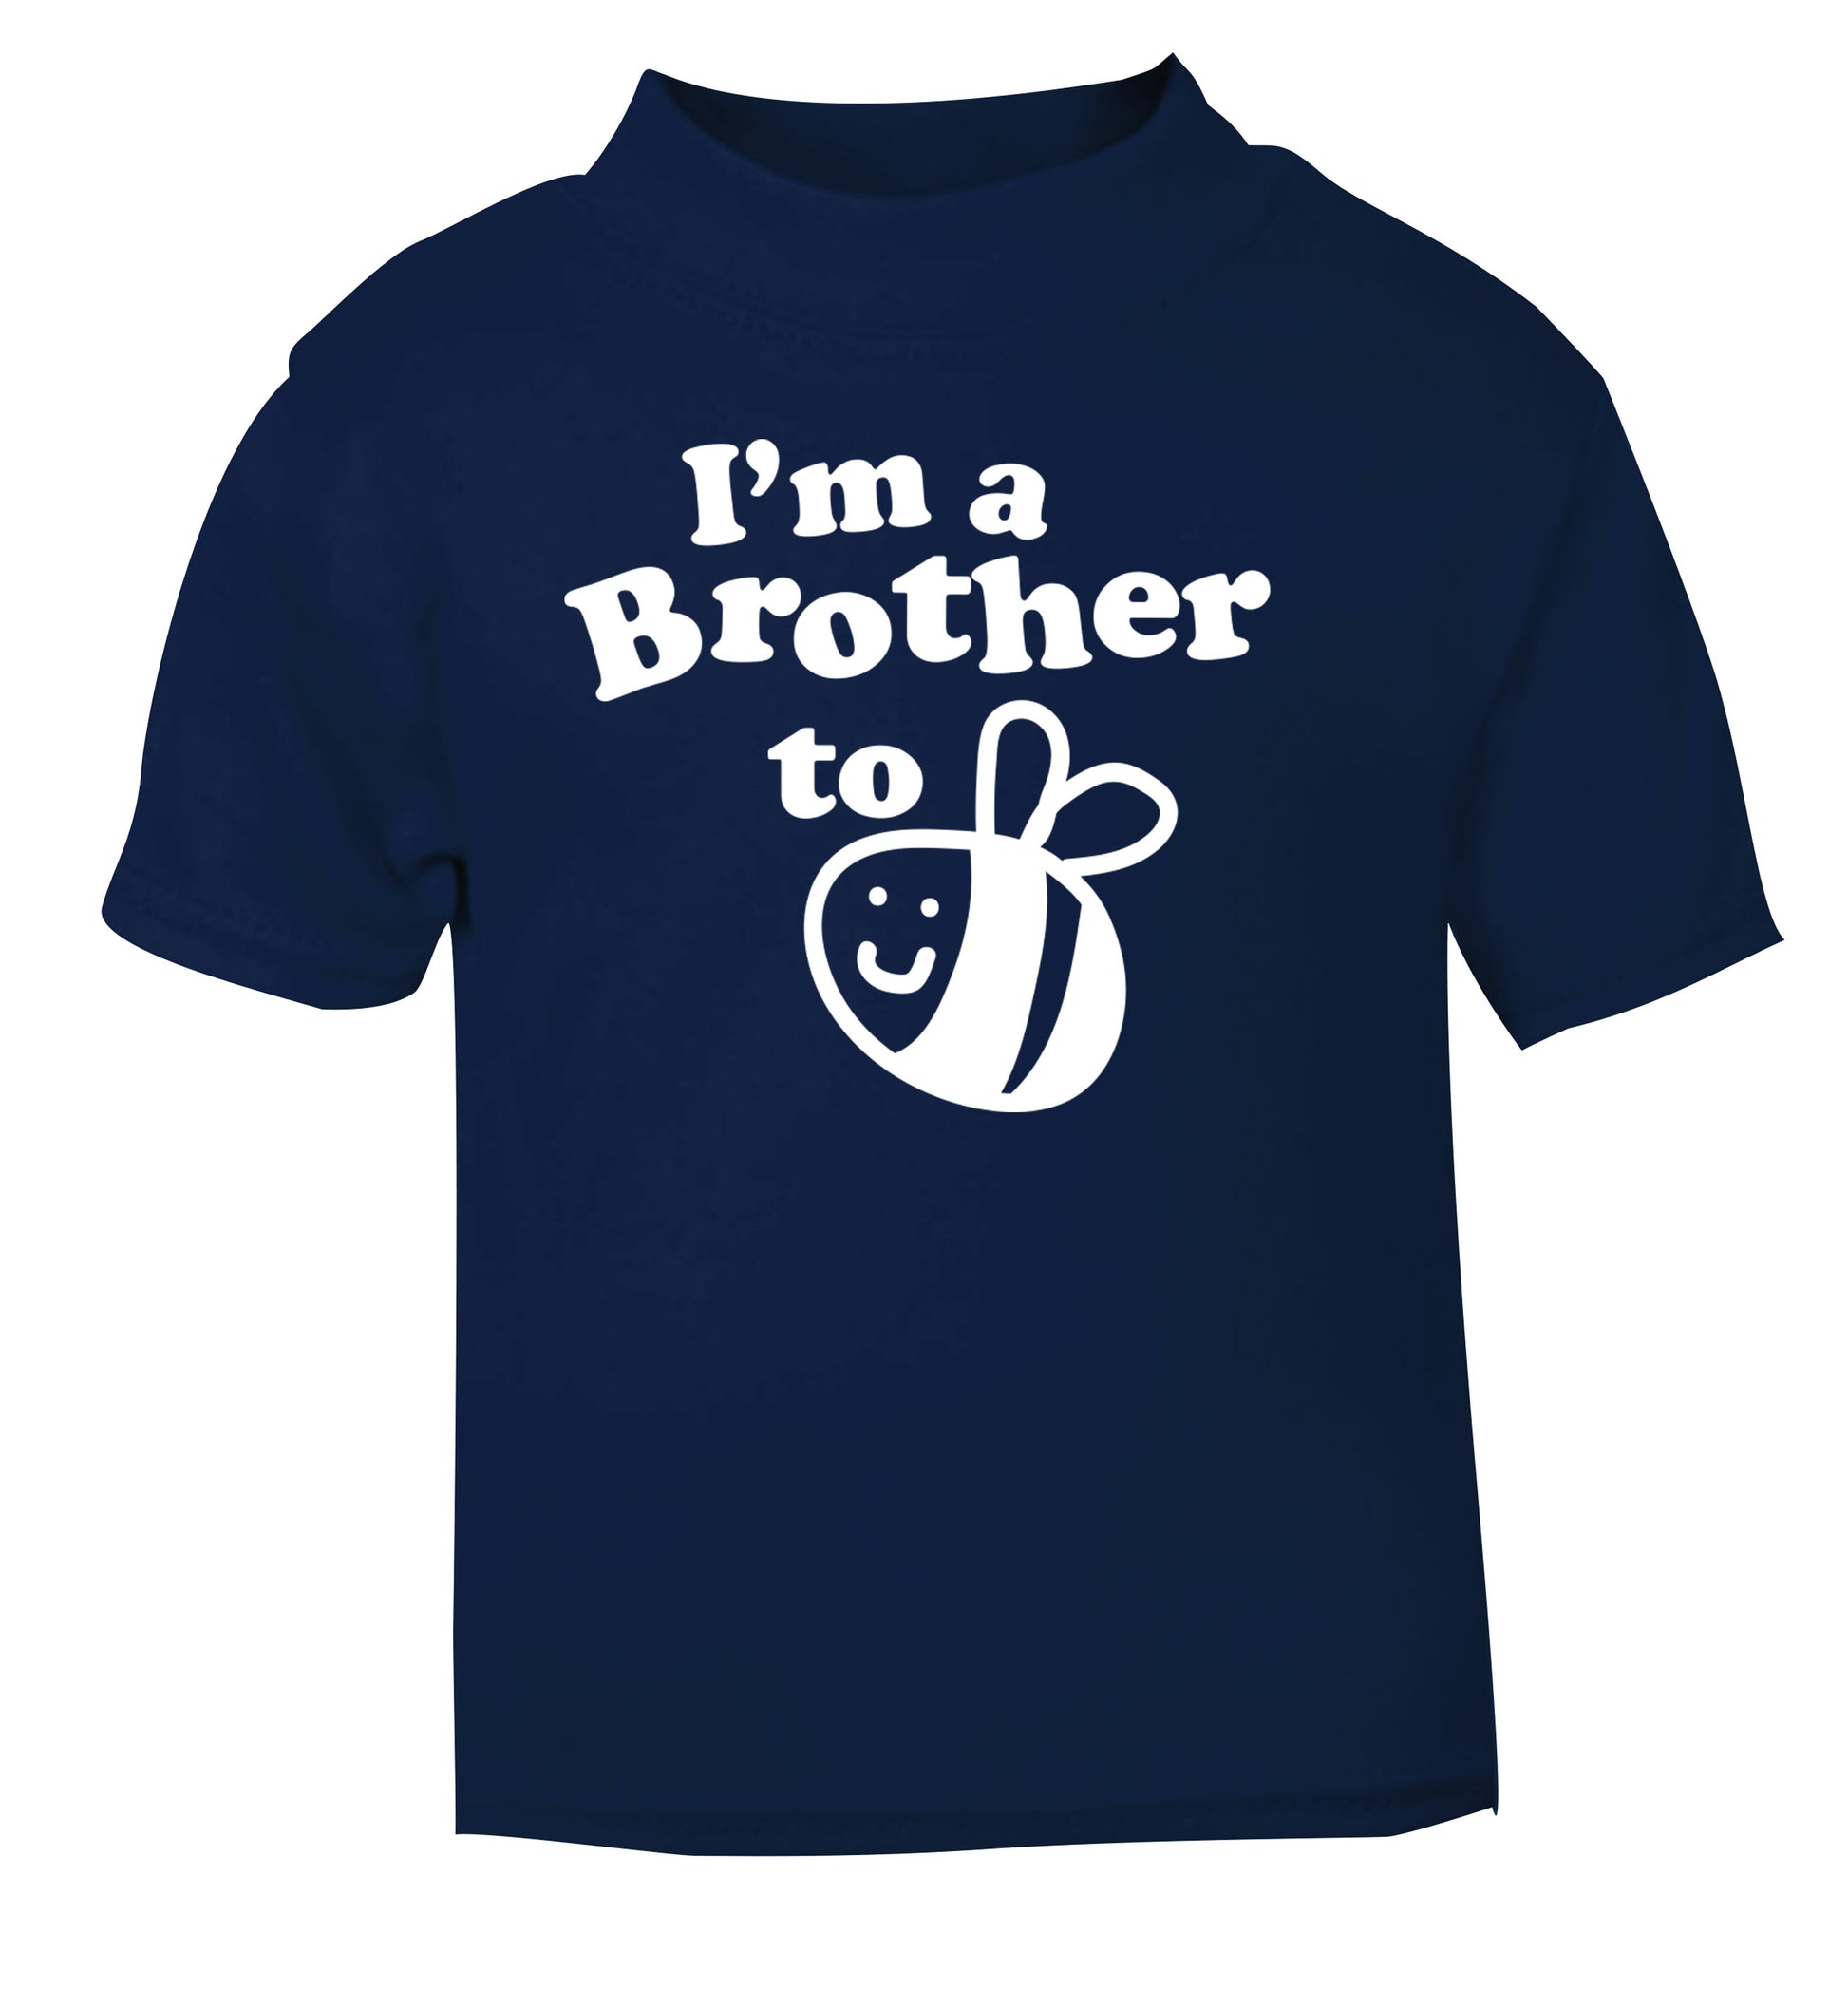 I'm a brother to be navy Baby Toddler Tshirt 2 Years